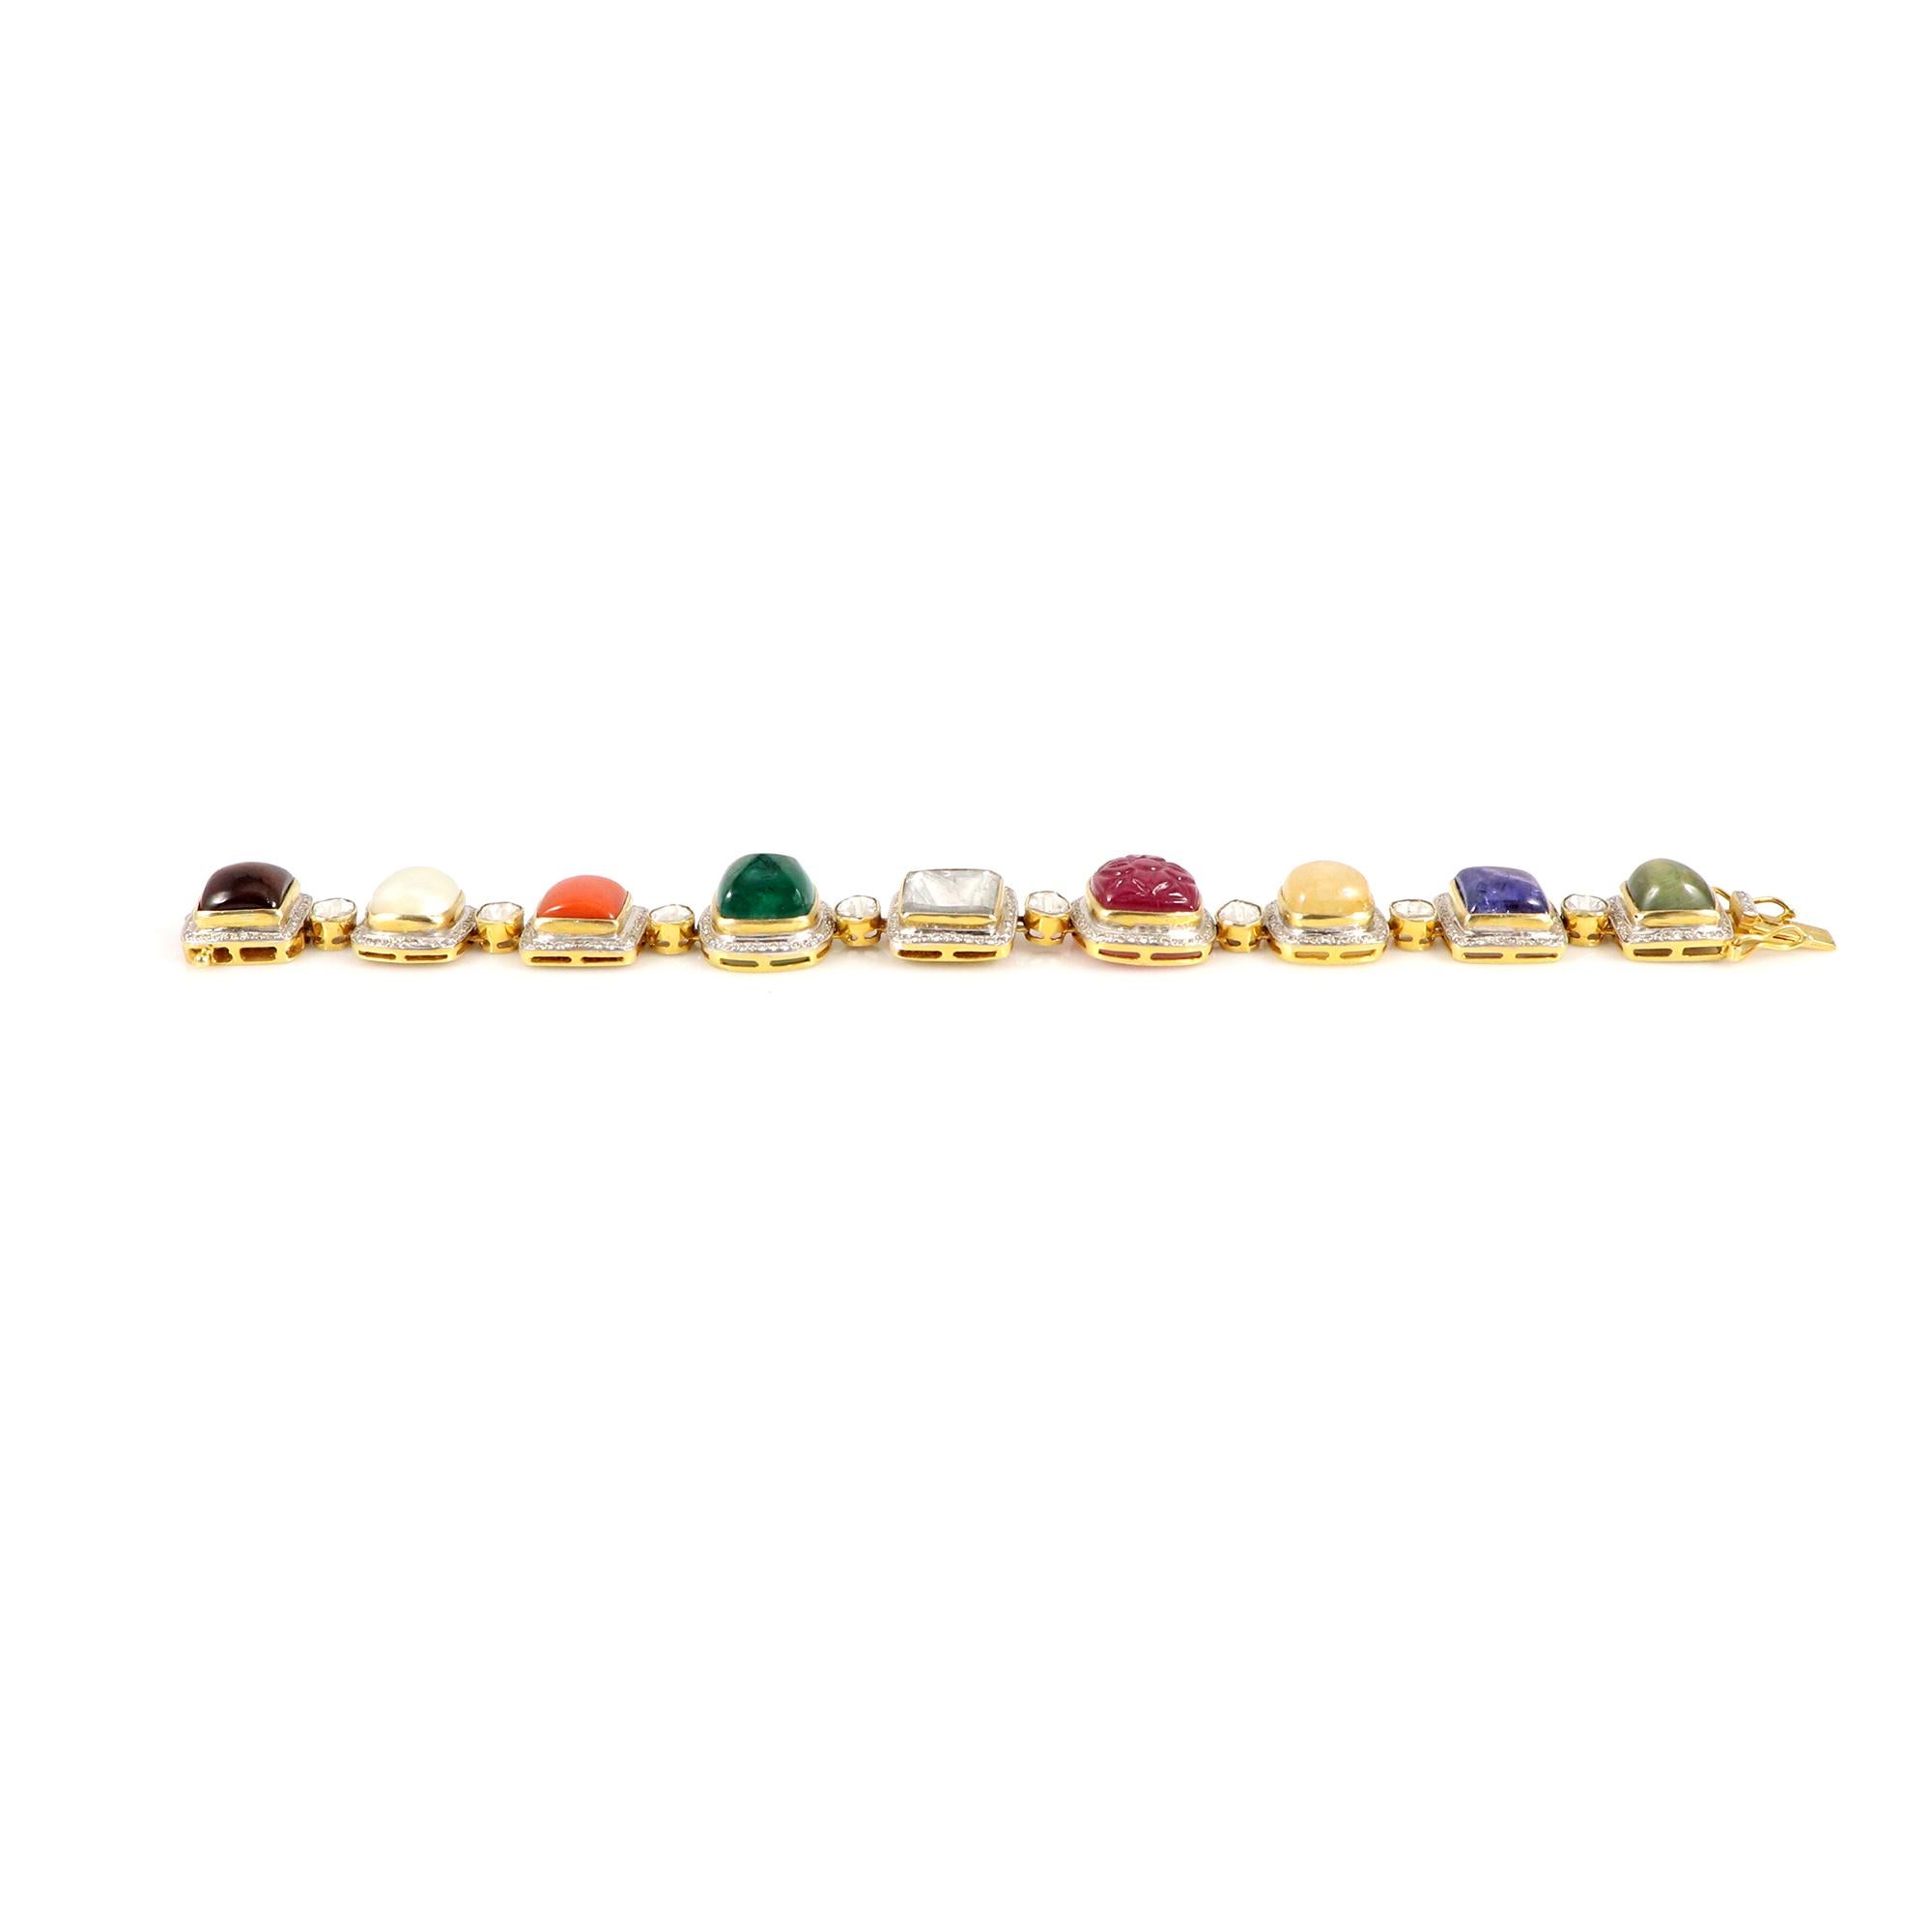 This exquisite multi-colored Navratan bracelet, crafted in 18K Yellow gold, is a stunning piece featuring a combination of vibrant gemstones in a spectrum of colors, elegantly set within the delicate links of the bracelet. Each stone is meticulously